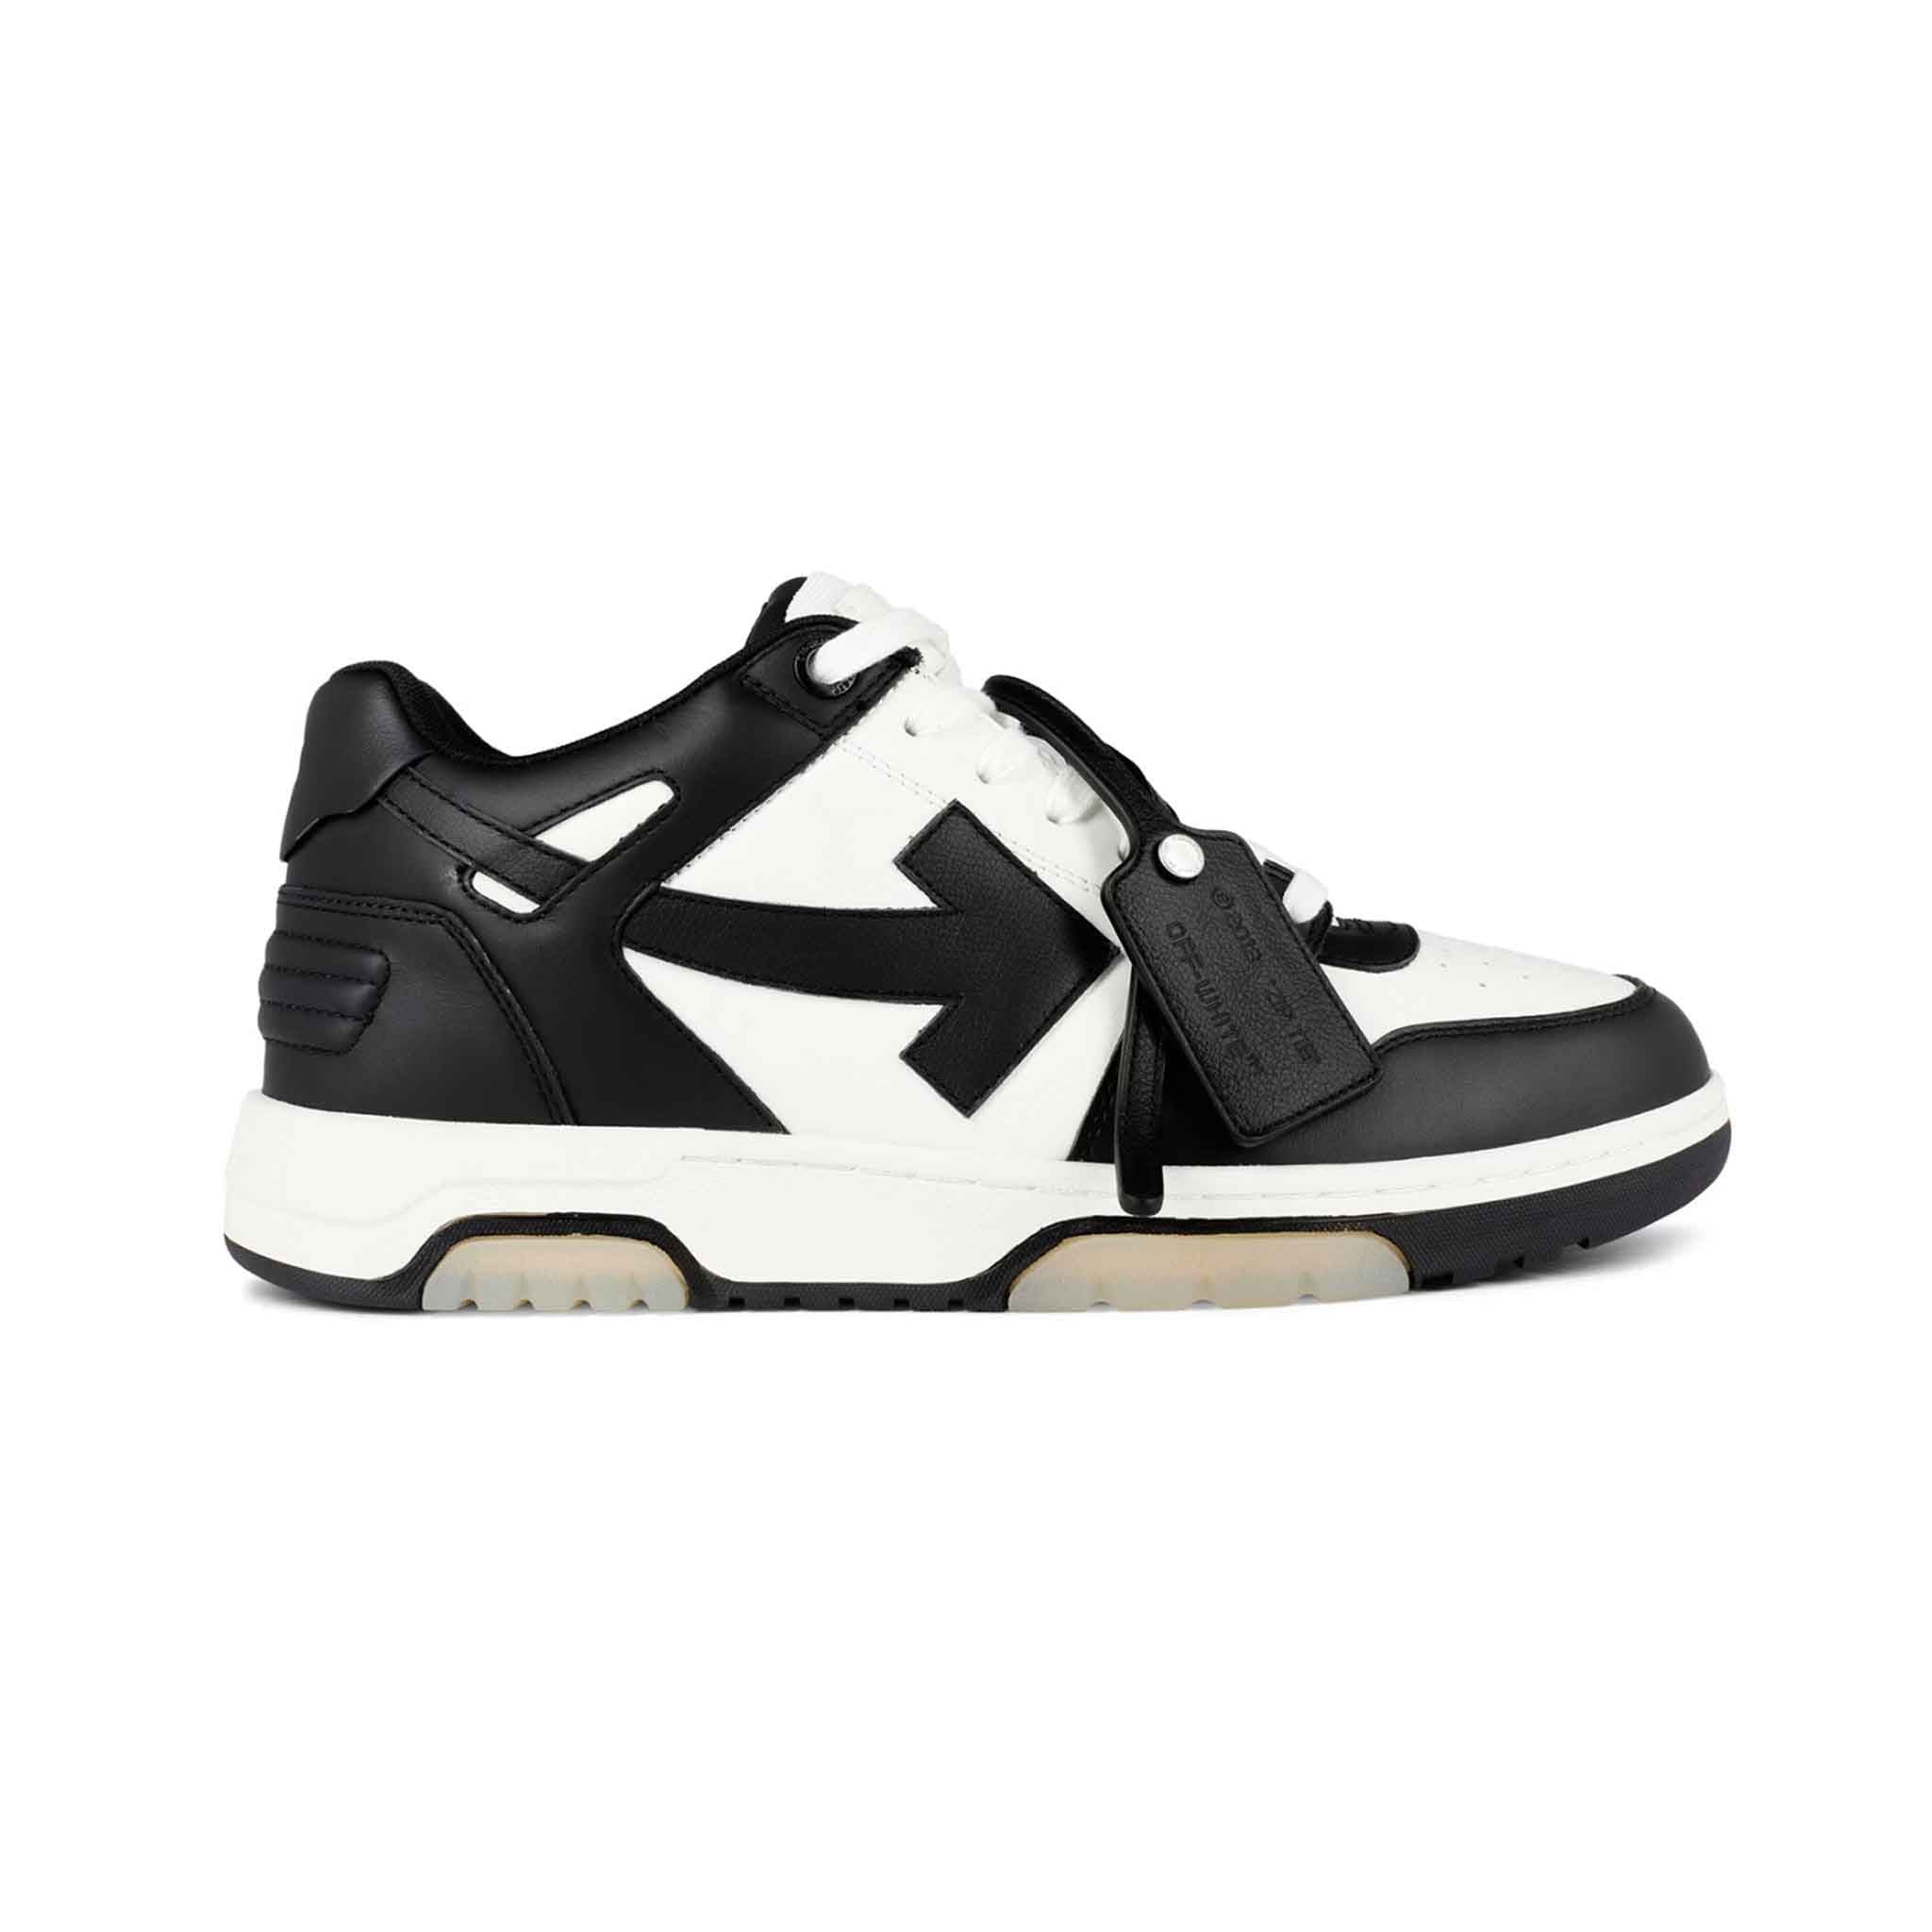 OFF-WHITE Out Of Office Sneaker Calf Leather in Black/White